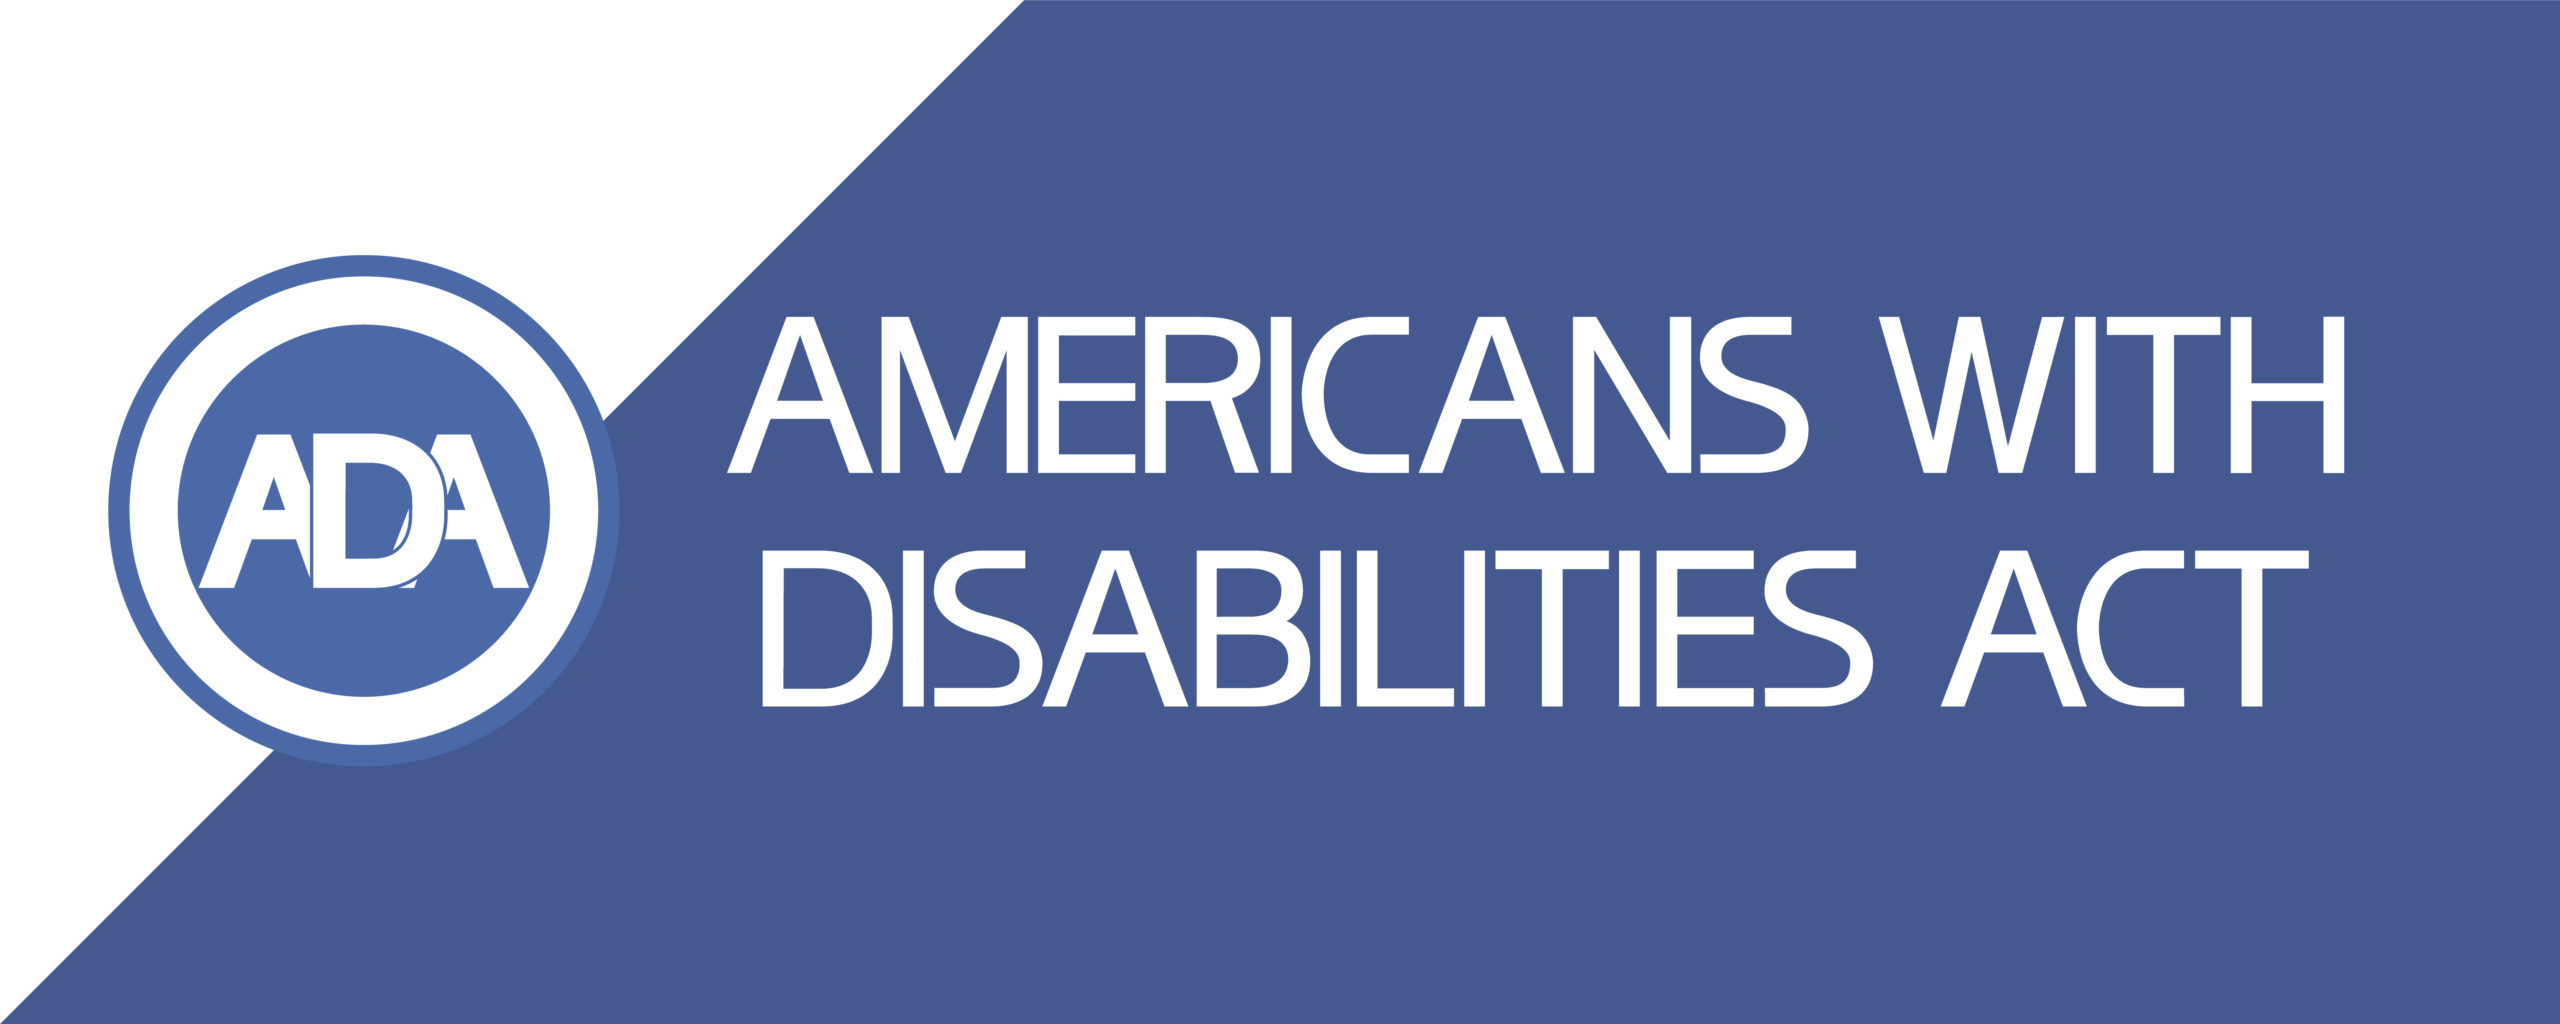 Americans with disabilities act (ADA) Text poster flat illustration.